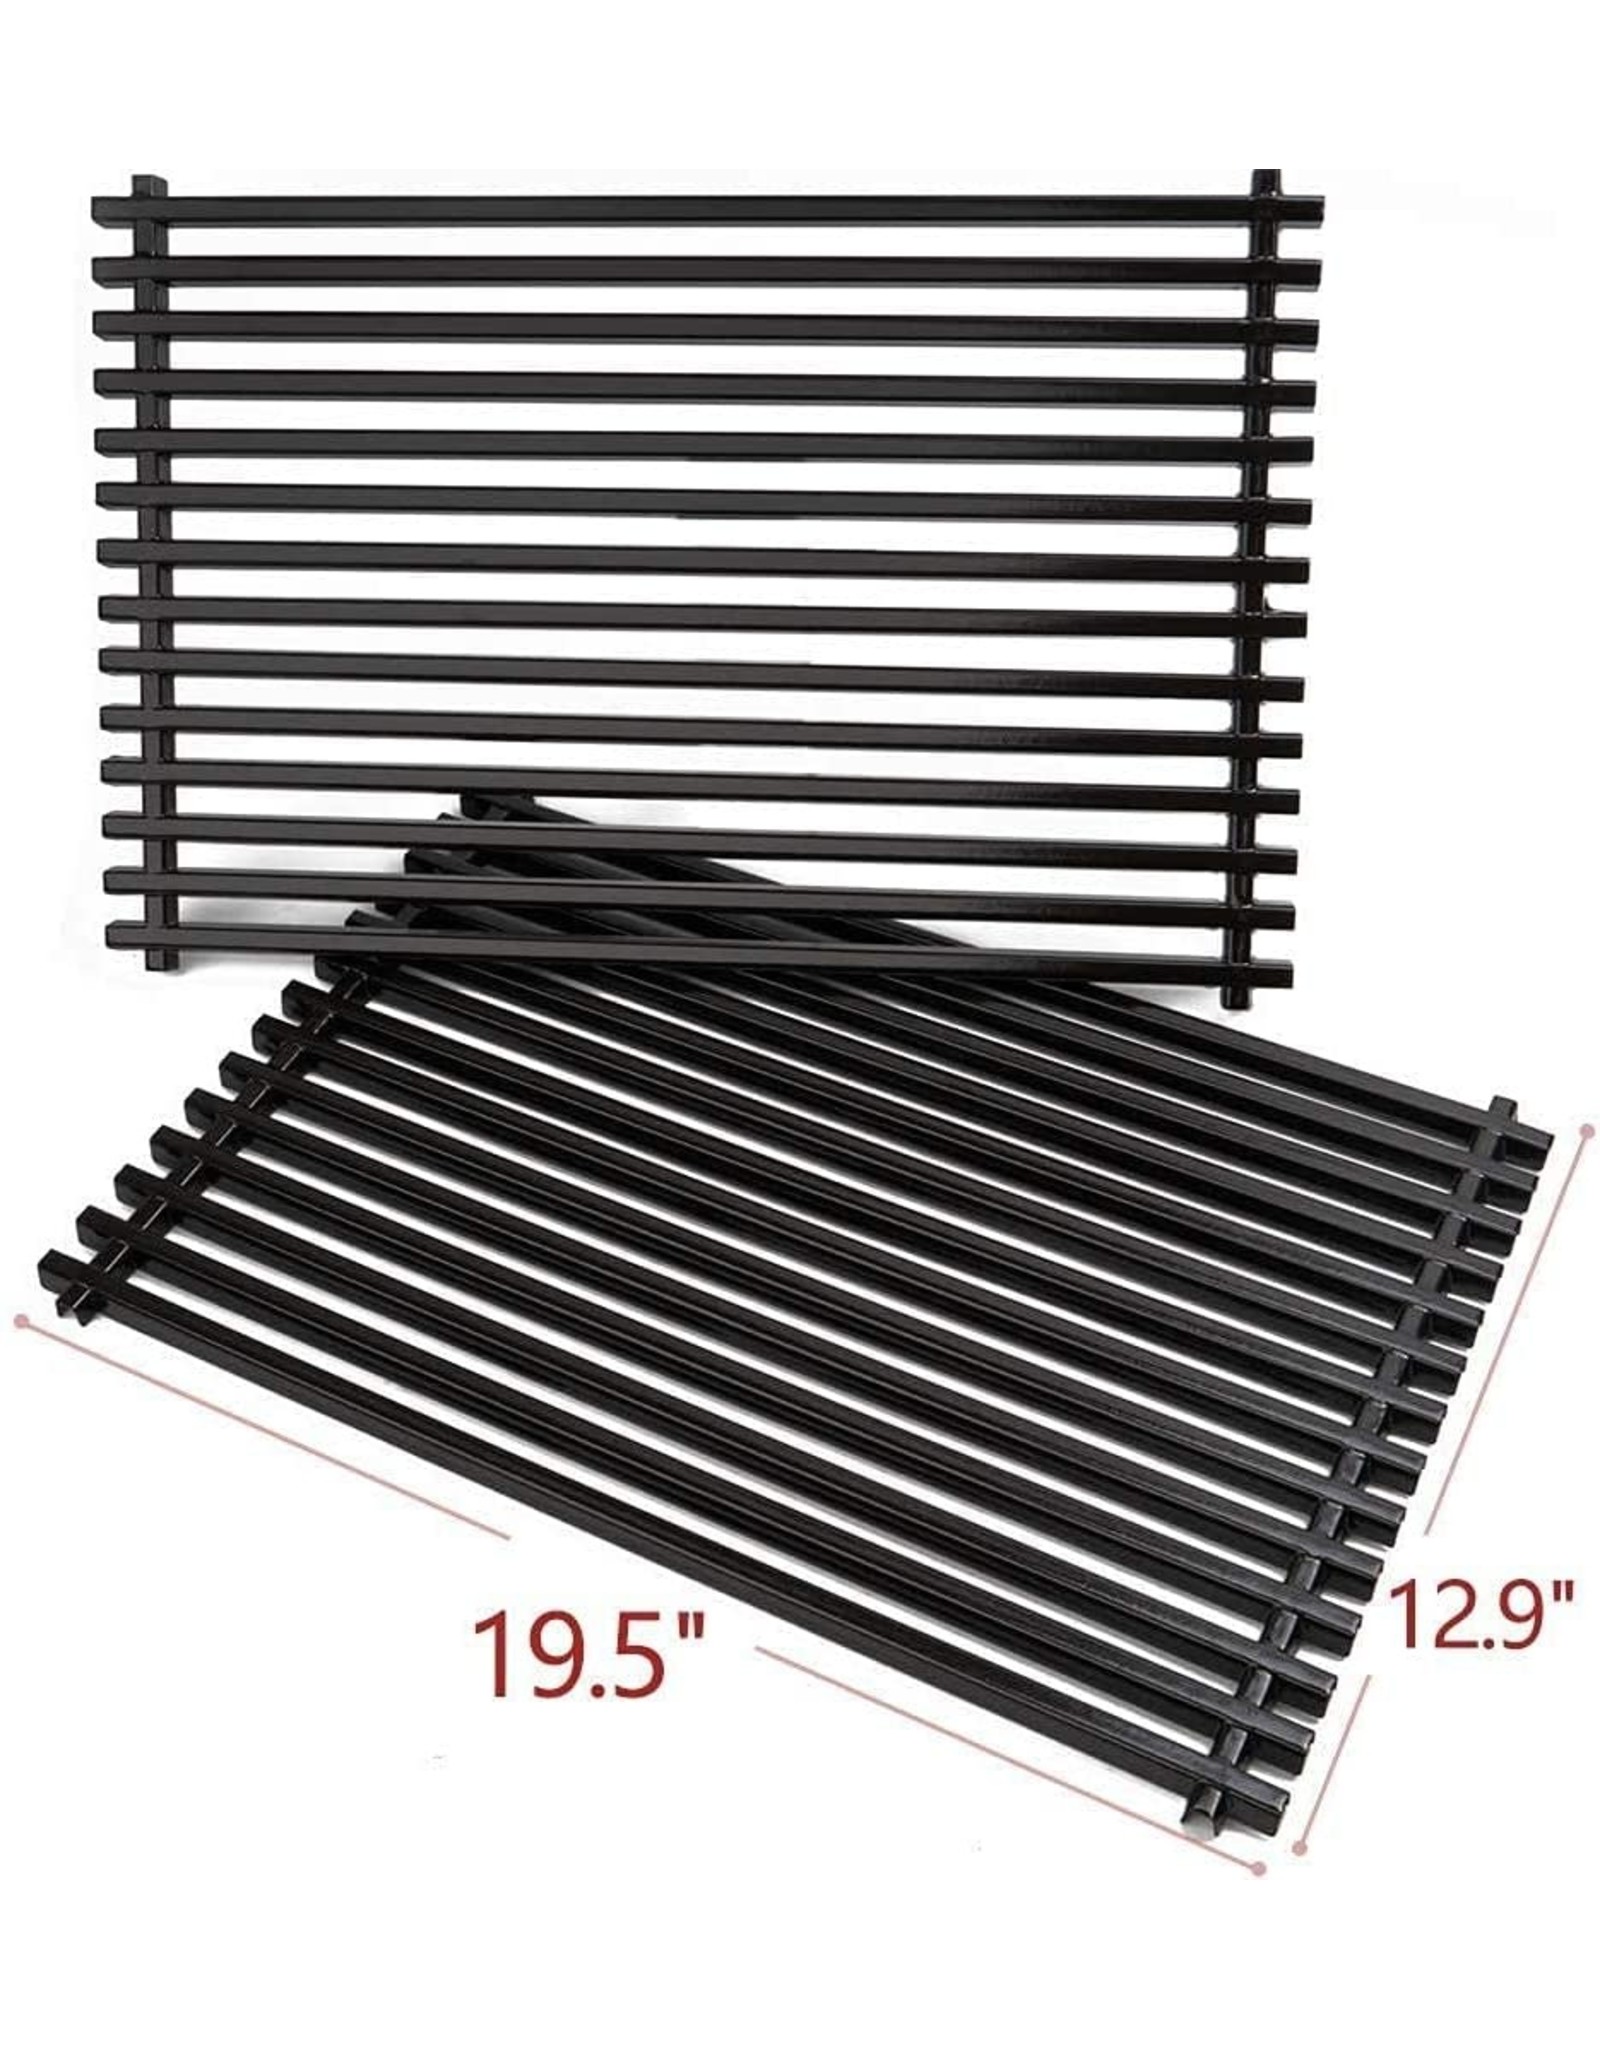 Grill Grates for Weber Genesis E-310 E-330, Genesis 300 Series Gas Grill Replacement Parts, Porcelain-Enameled, x 12.9 Inch, 2-Pack - Amazing Bargains USA - Buffalo, NY